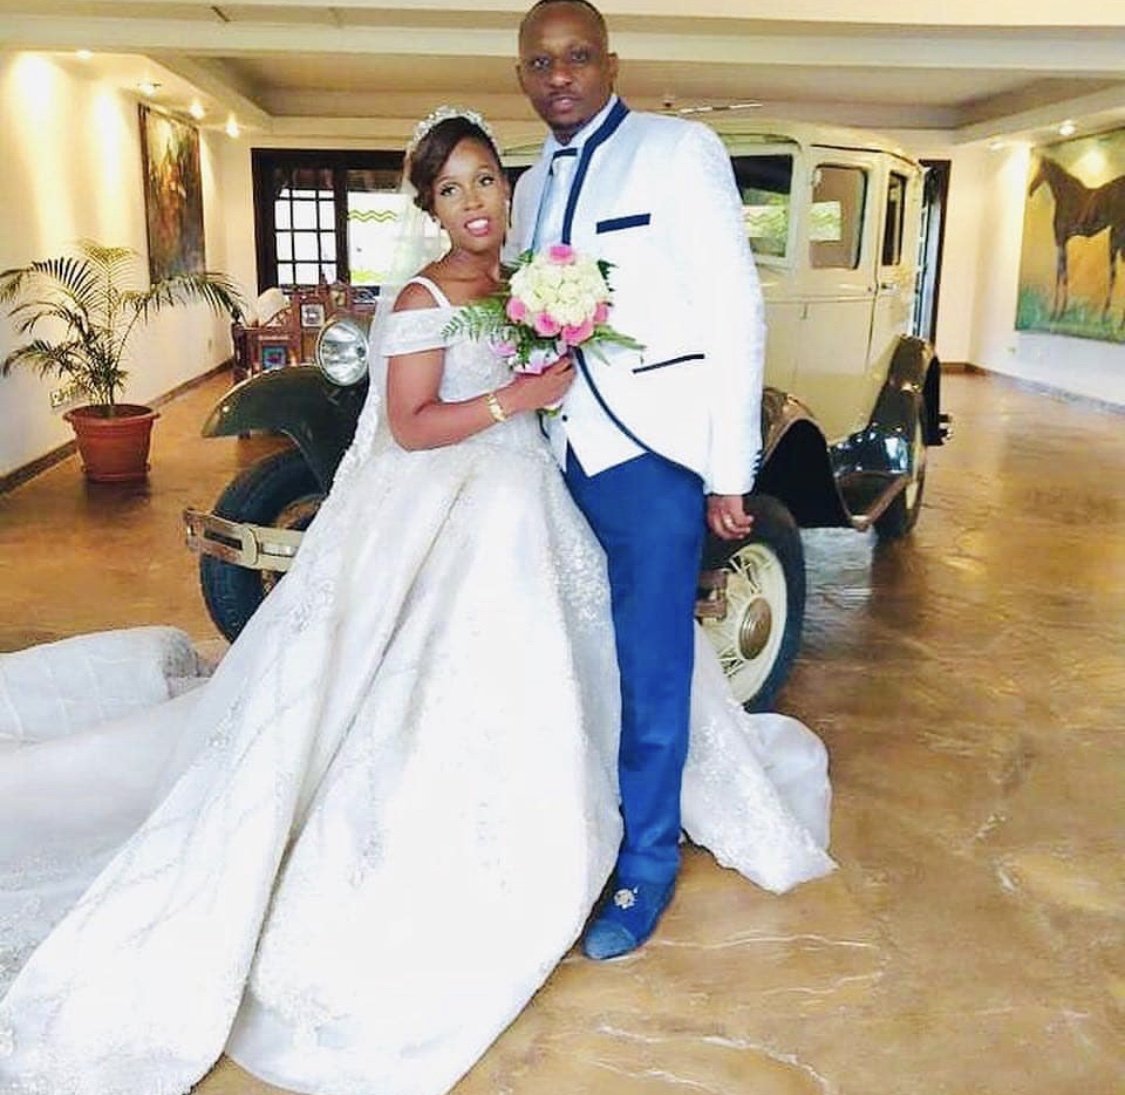 Former rapper Bamboo weds the love of his life in lavish white wedding (Photos)